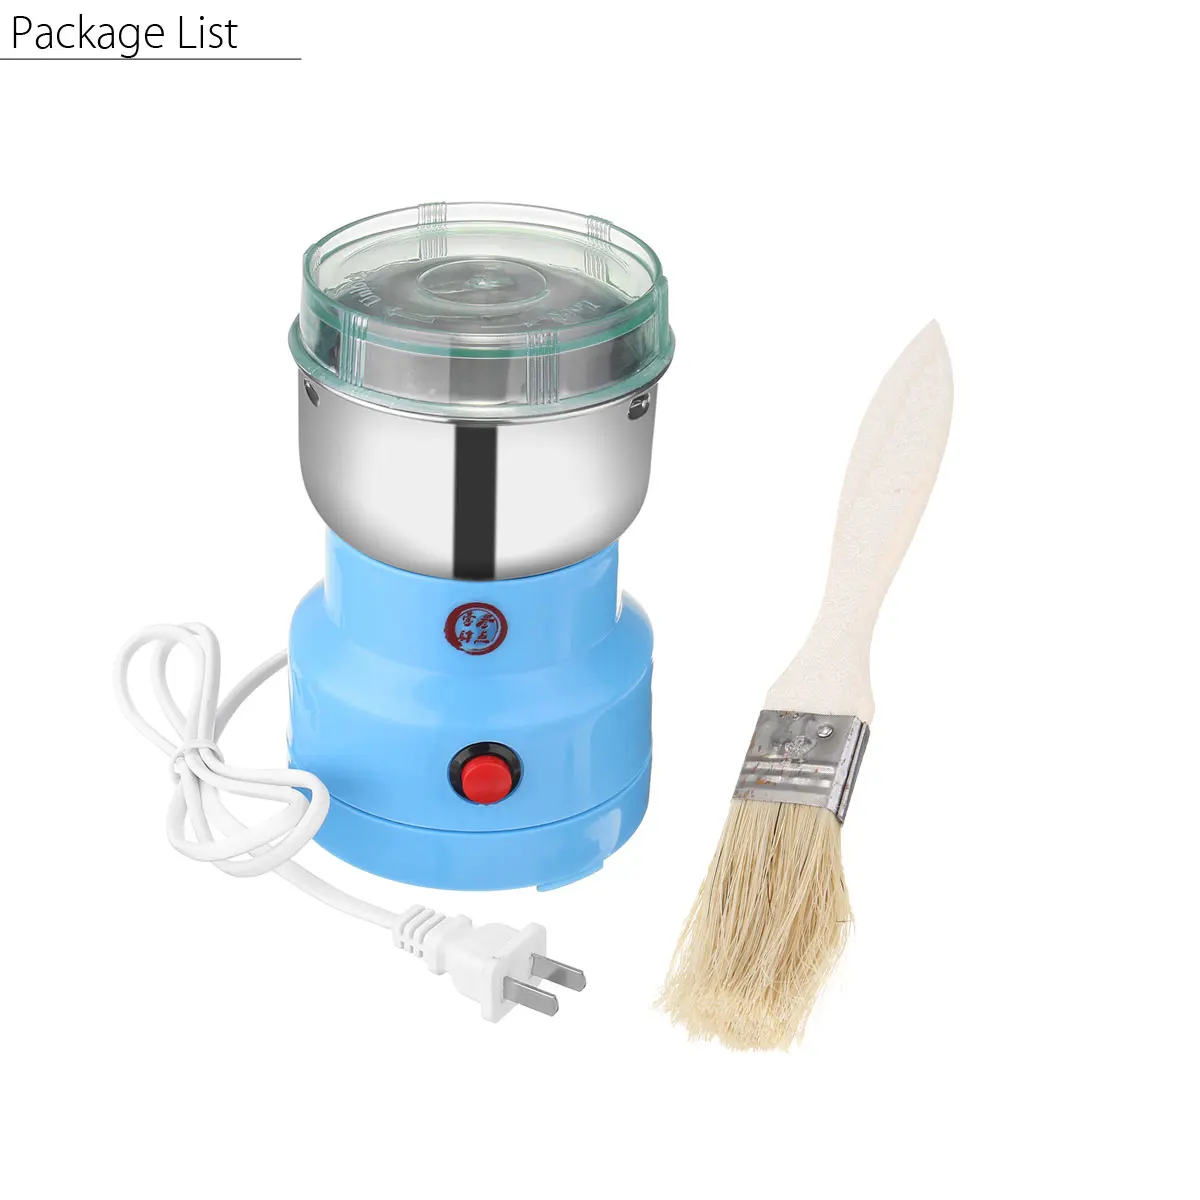 

220V NEW DIY Tool Household Electric Herbs Spices Nuts Grains Coffee Bean Grinder Mill Grinding Medicine Flour Powder Crusher